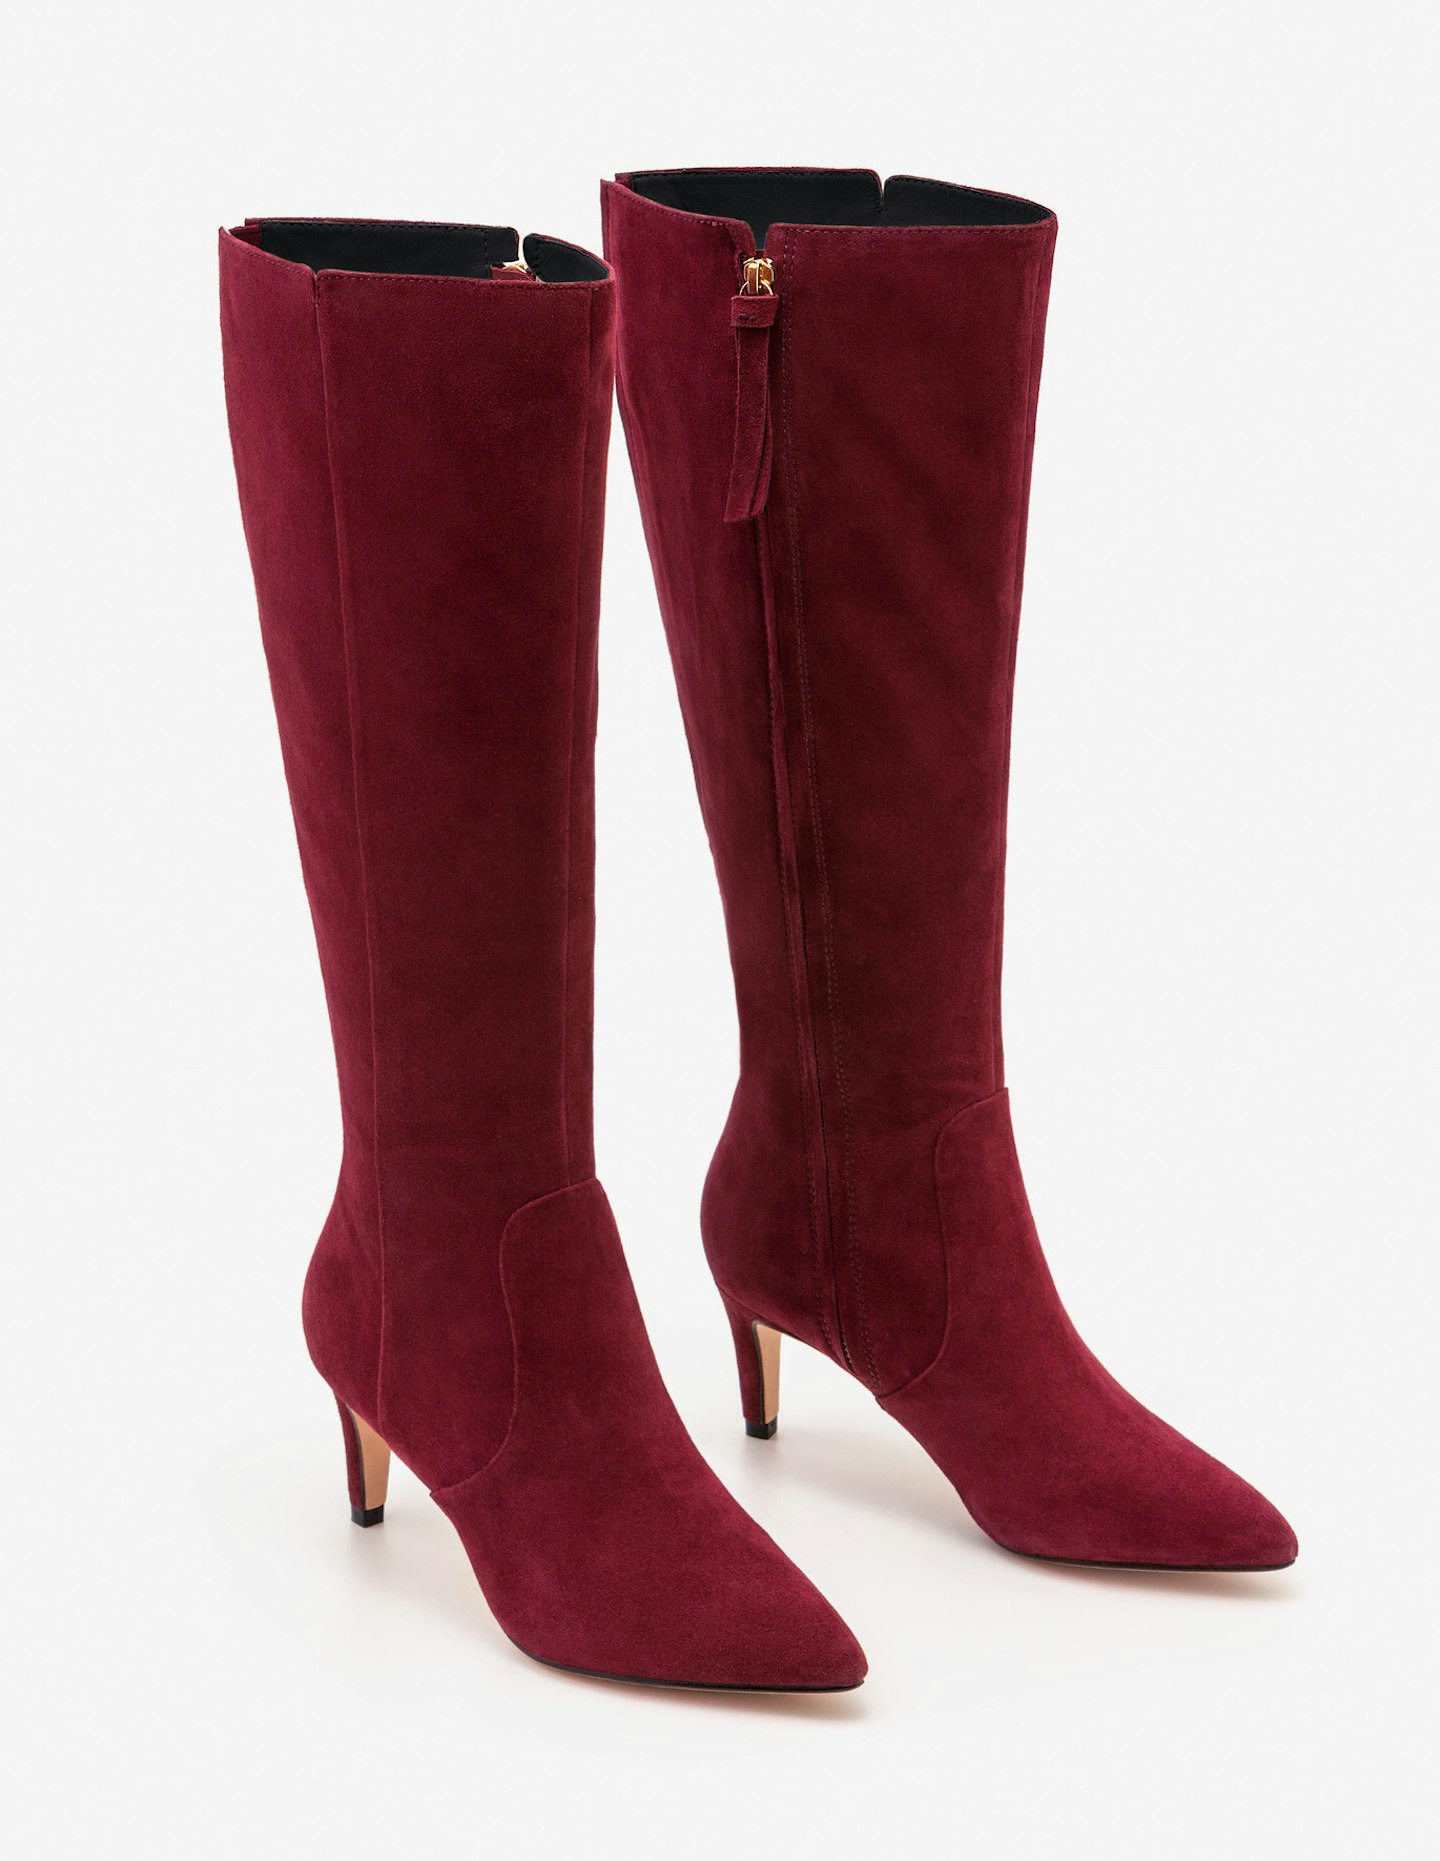 Red Leather Knee High Boots, WERE £190 NOW £95